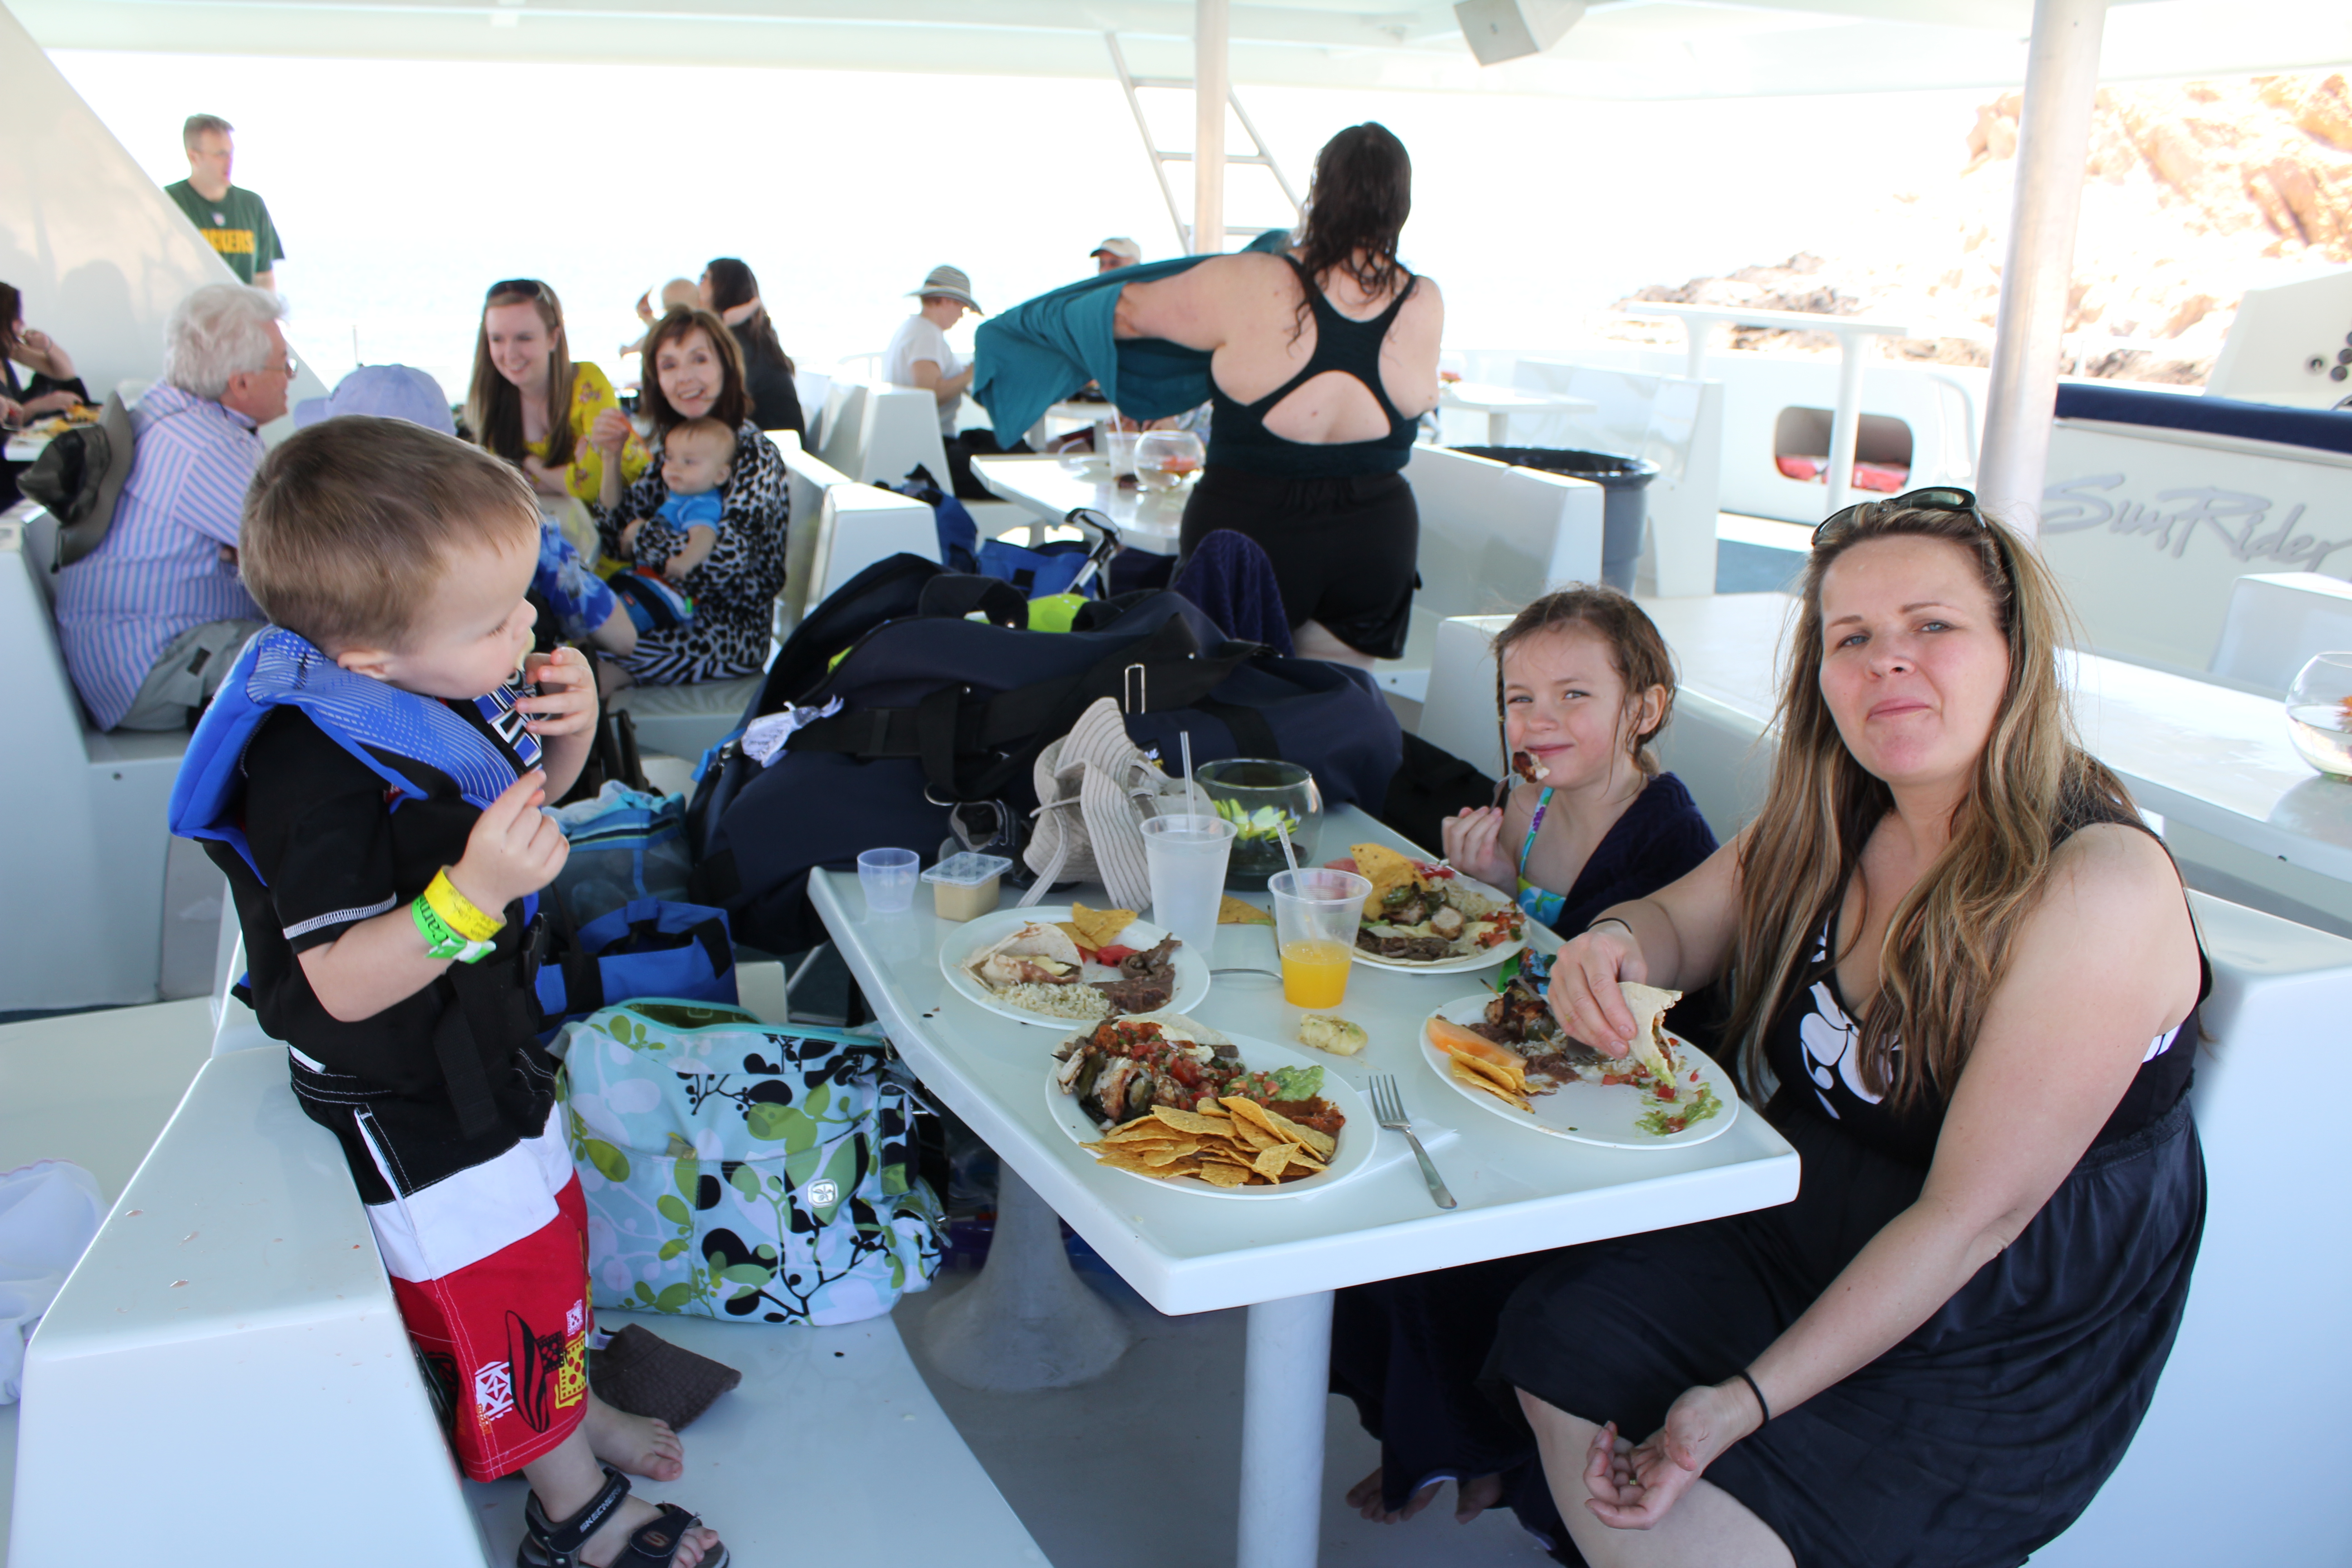 2012 Cabo Family Trip - Day 4